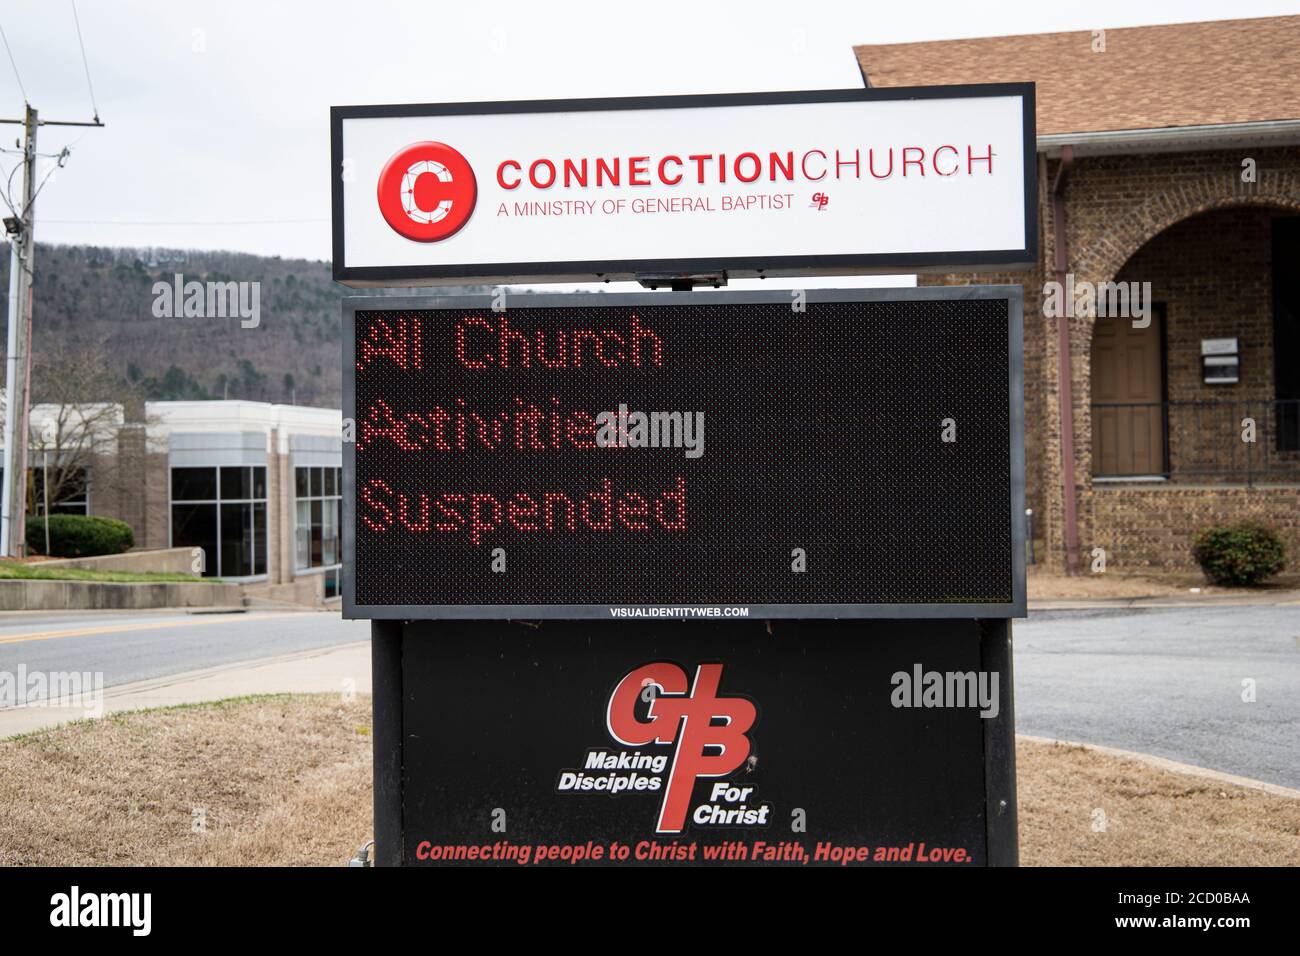 Heber Springs, AR.Businesses close, including a movie theater, bank, and church due to coronavirus pandemic. March 20, 2020. @ Veronica Bruno / Alamy Stock Photo